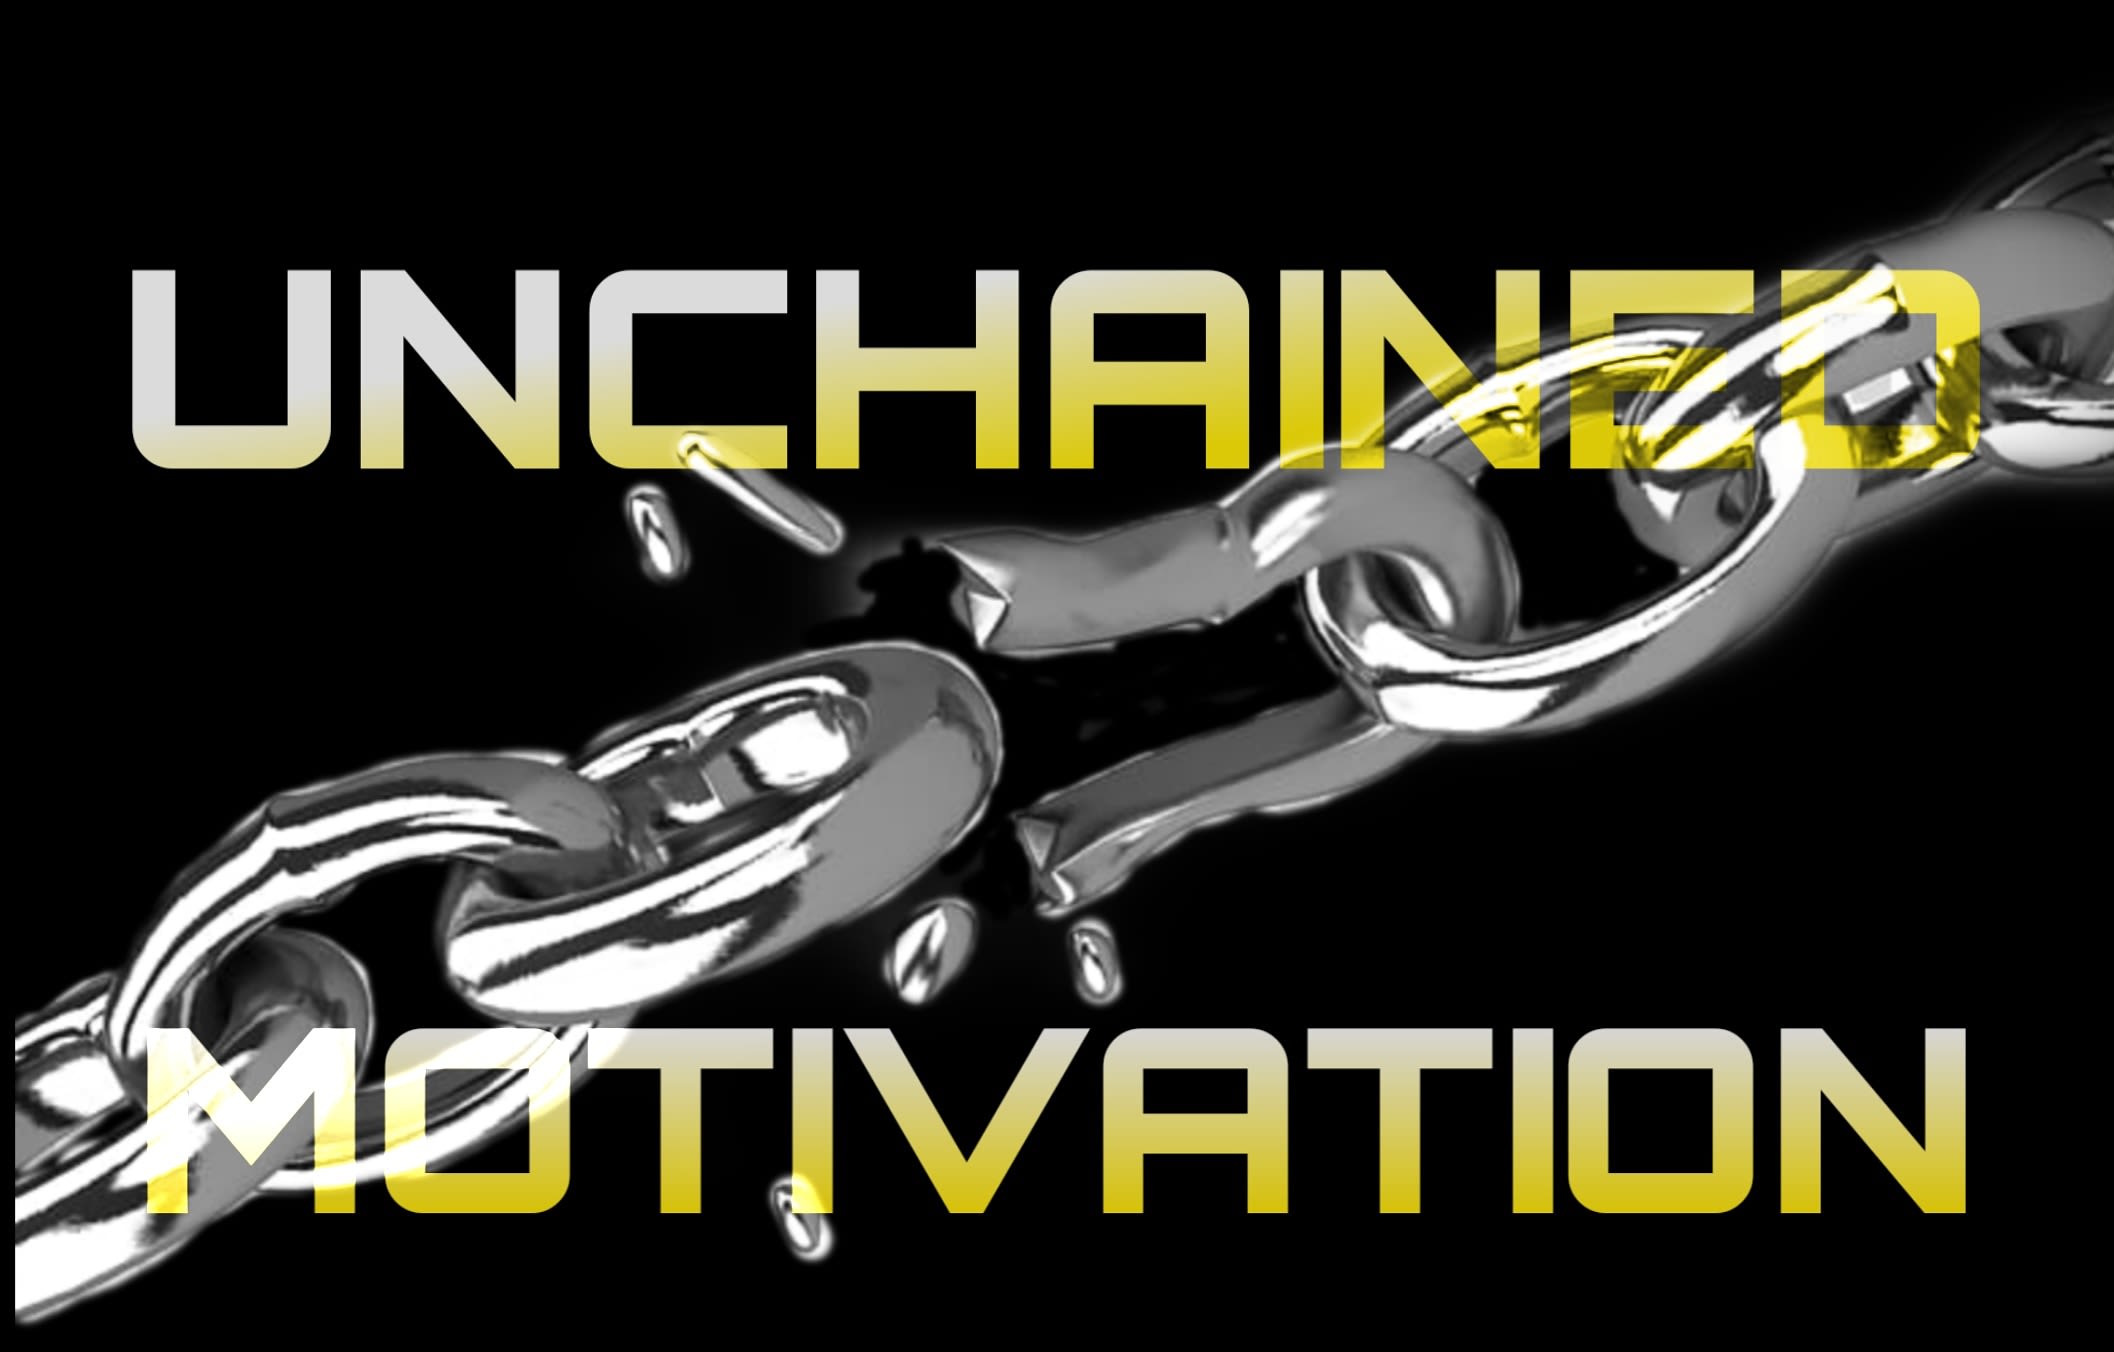 Unchained Motivation